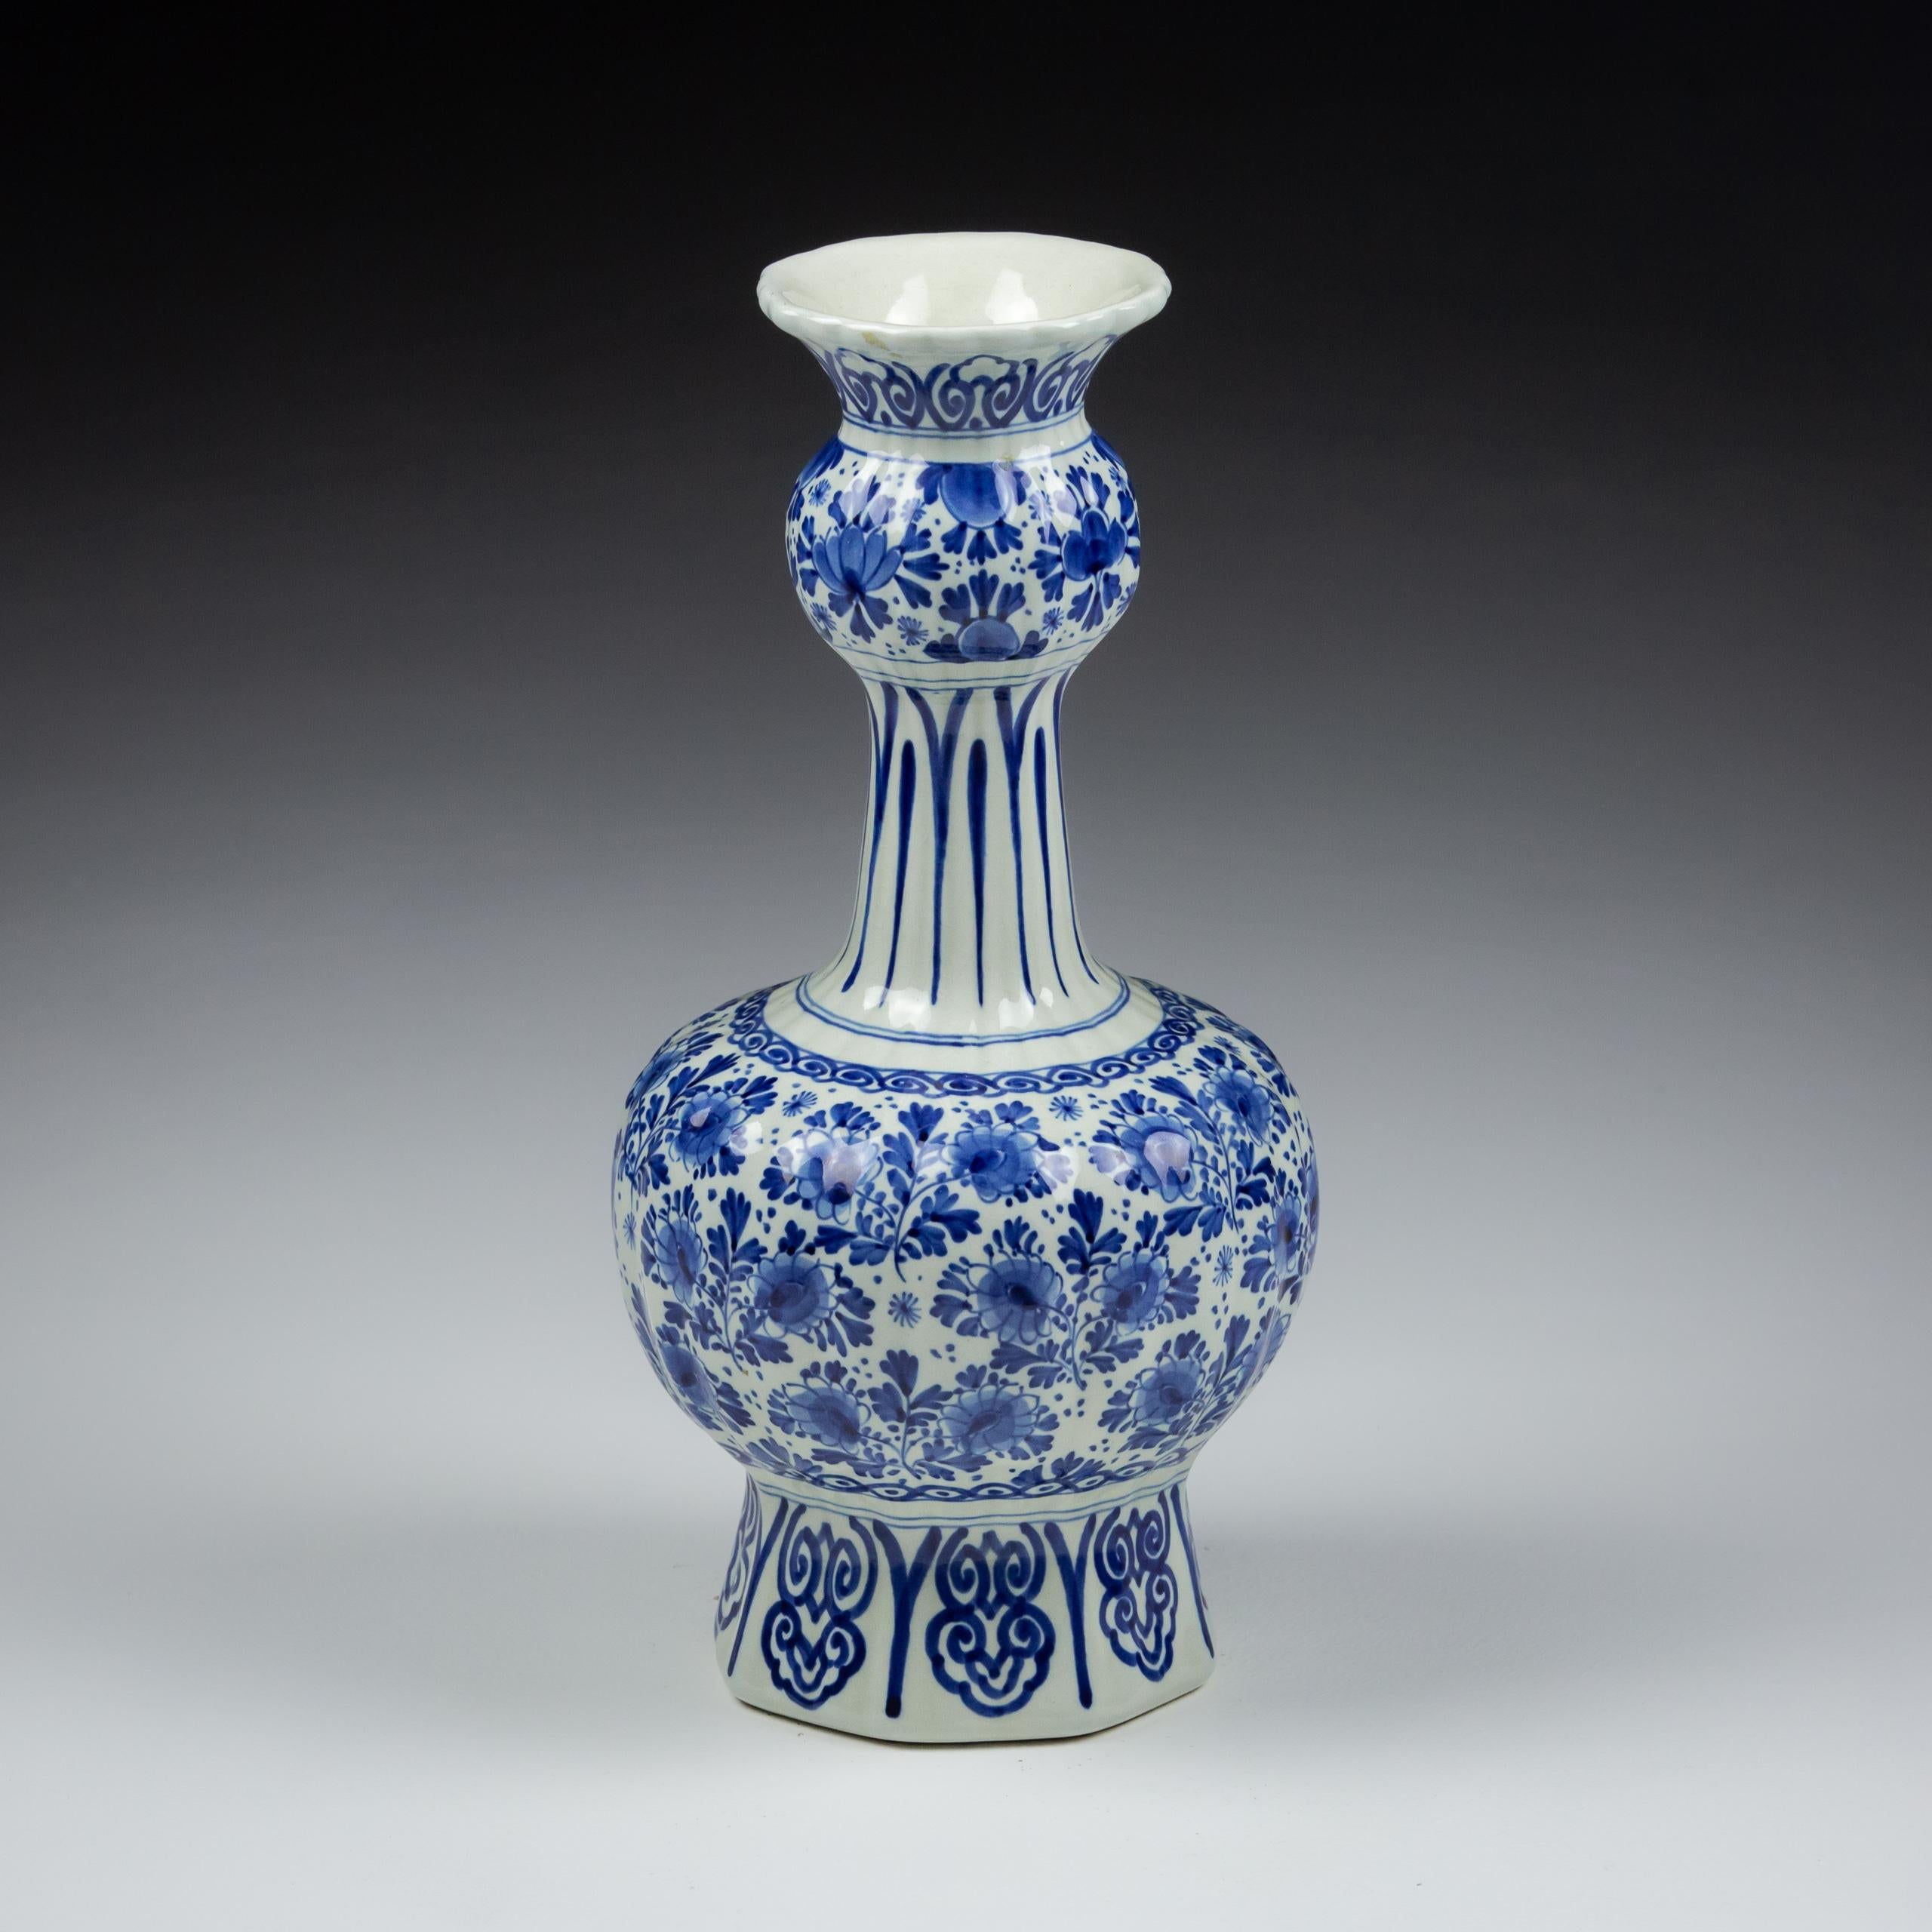 Dutch 20th Century Blue and White Delft Knobbelvaas or Gourd Vase For Sale